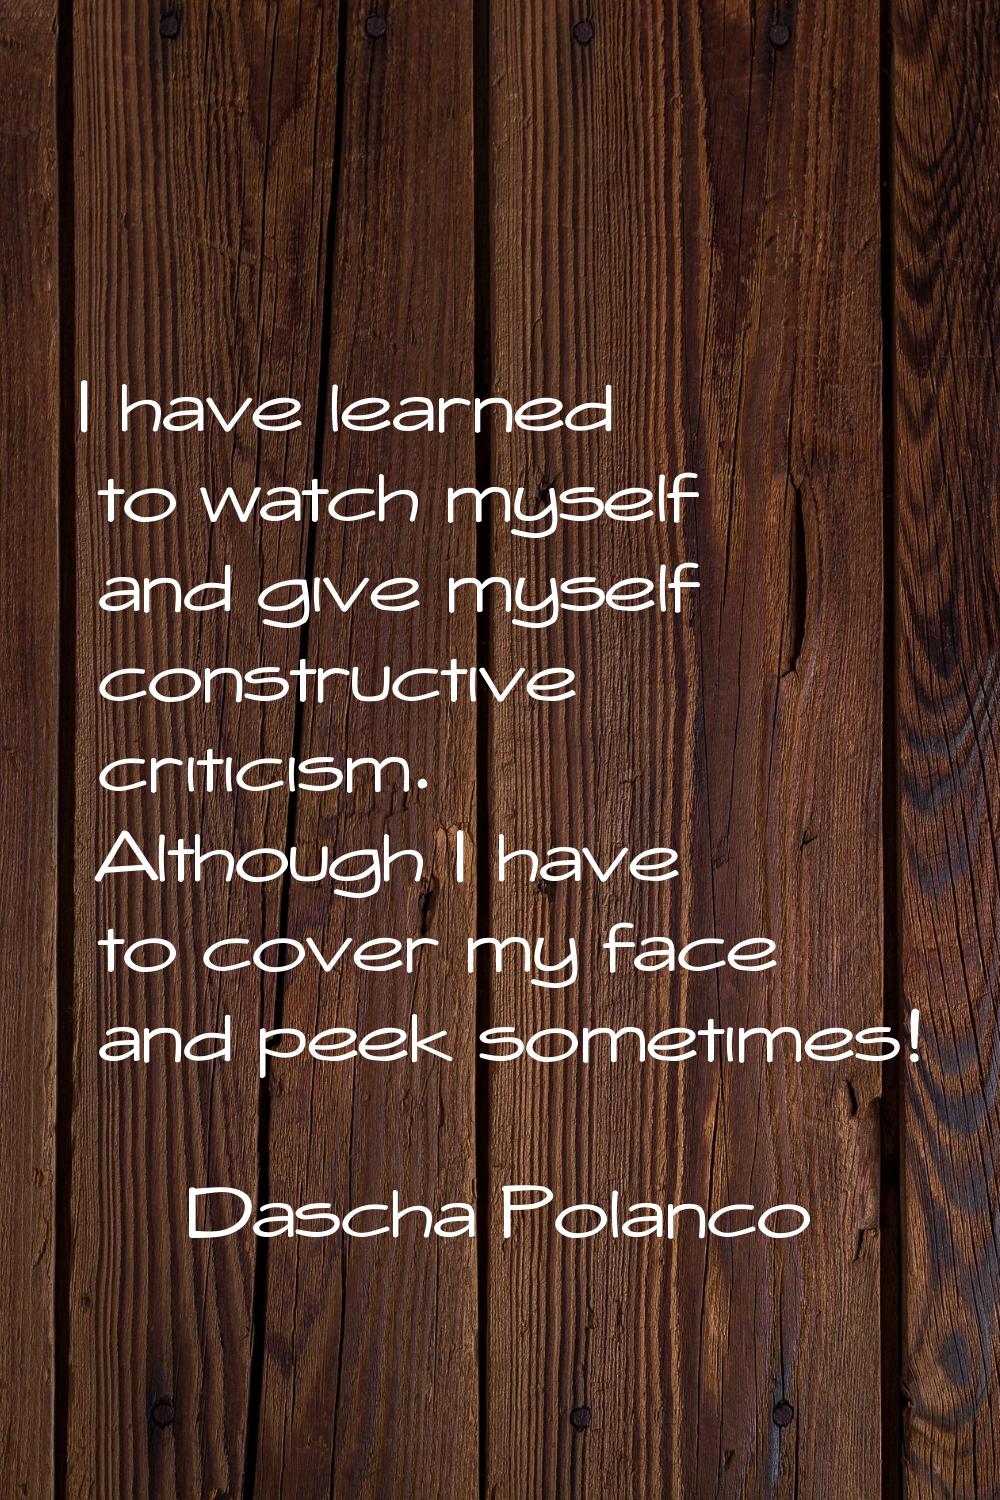 I have learned to watch myself and give myself constructive criticism. Although I have to cover my 